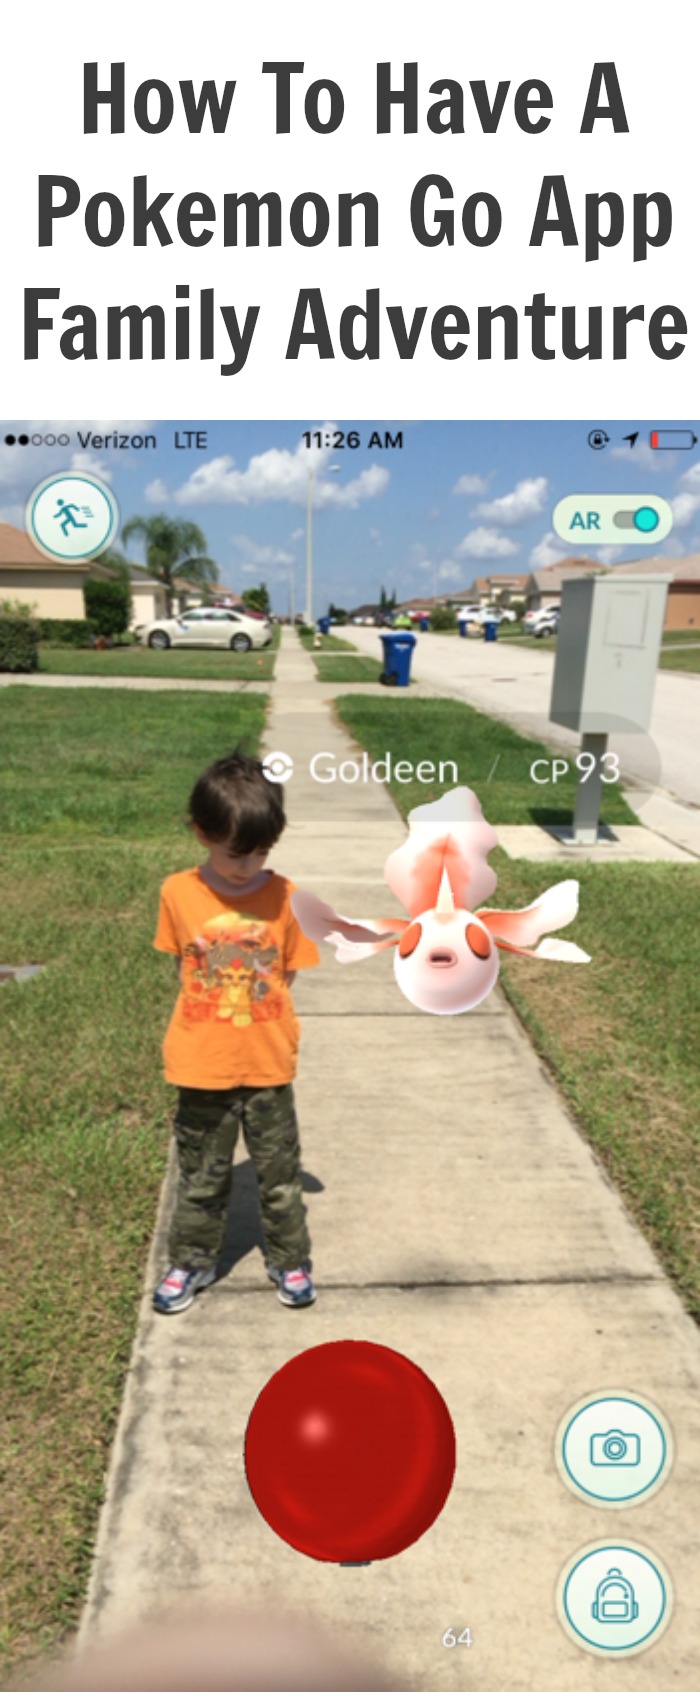 How To Have A Pokemon Go App Family Adventure